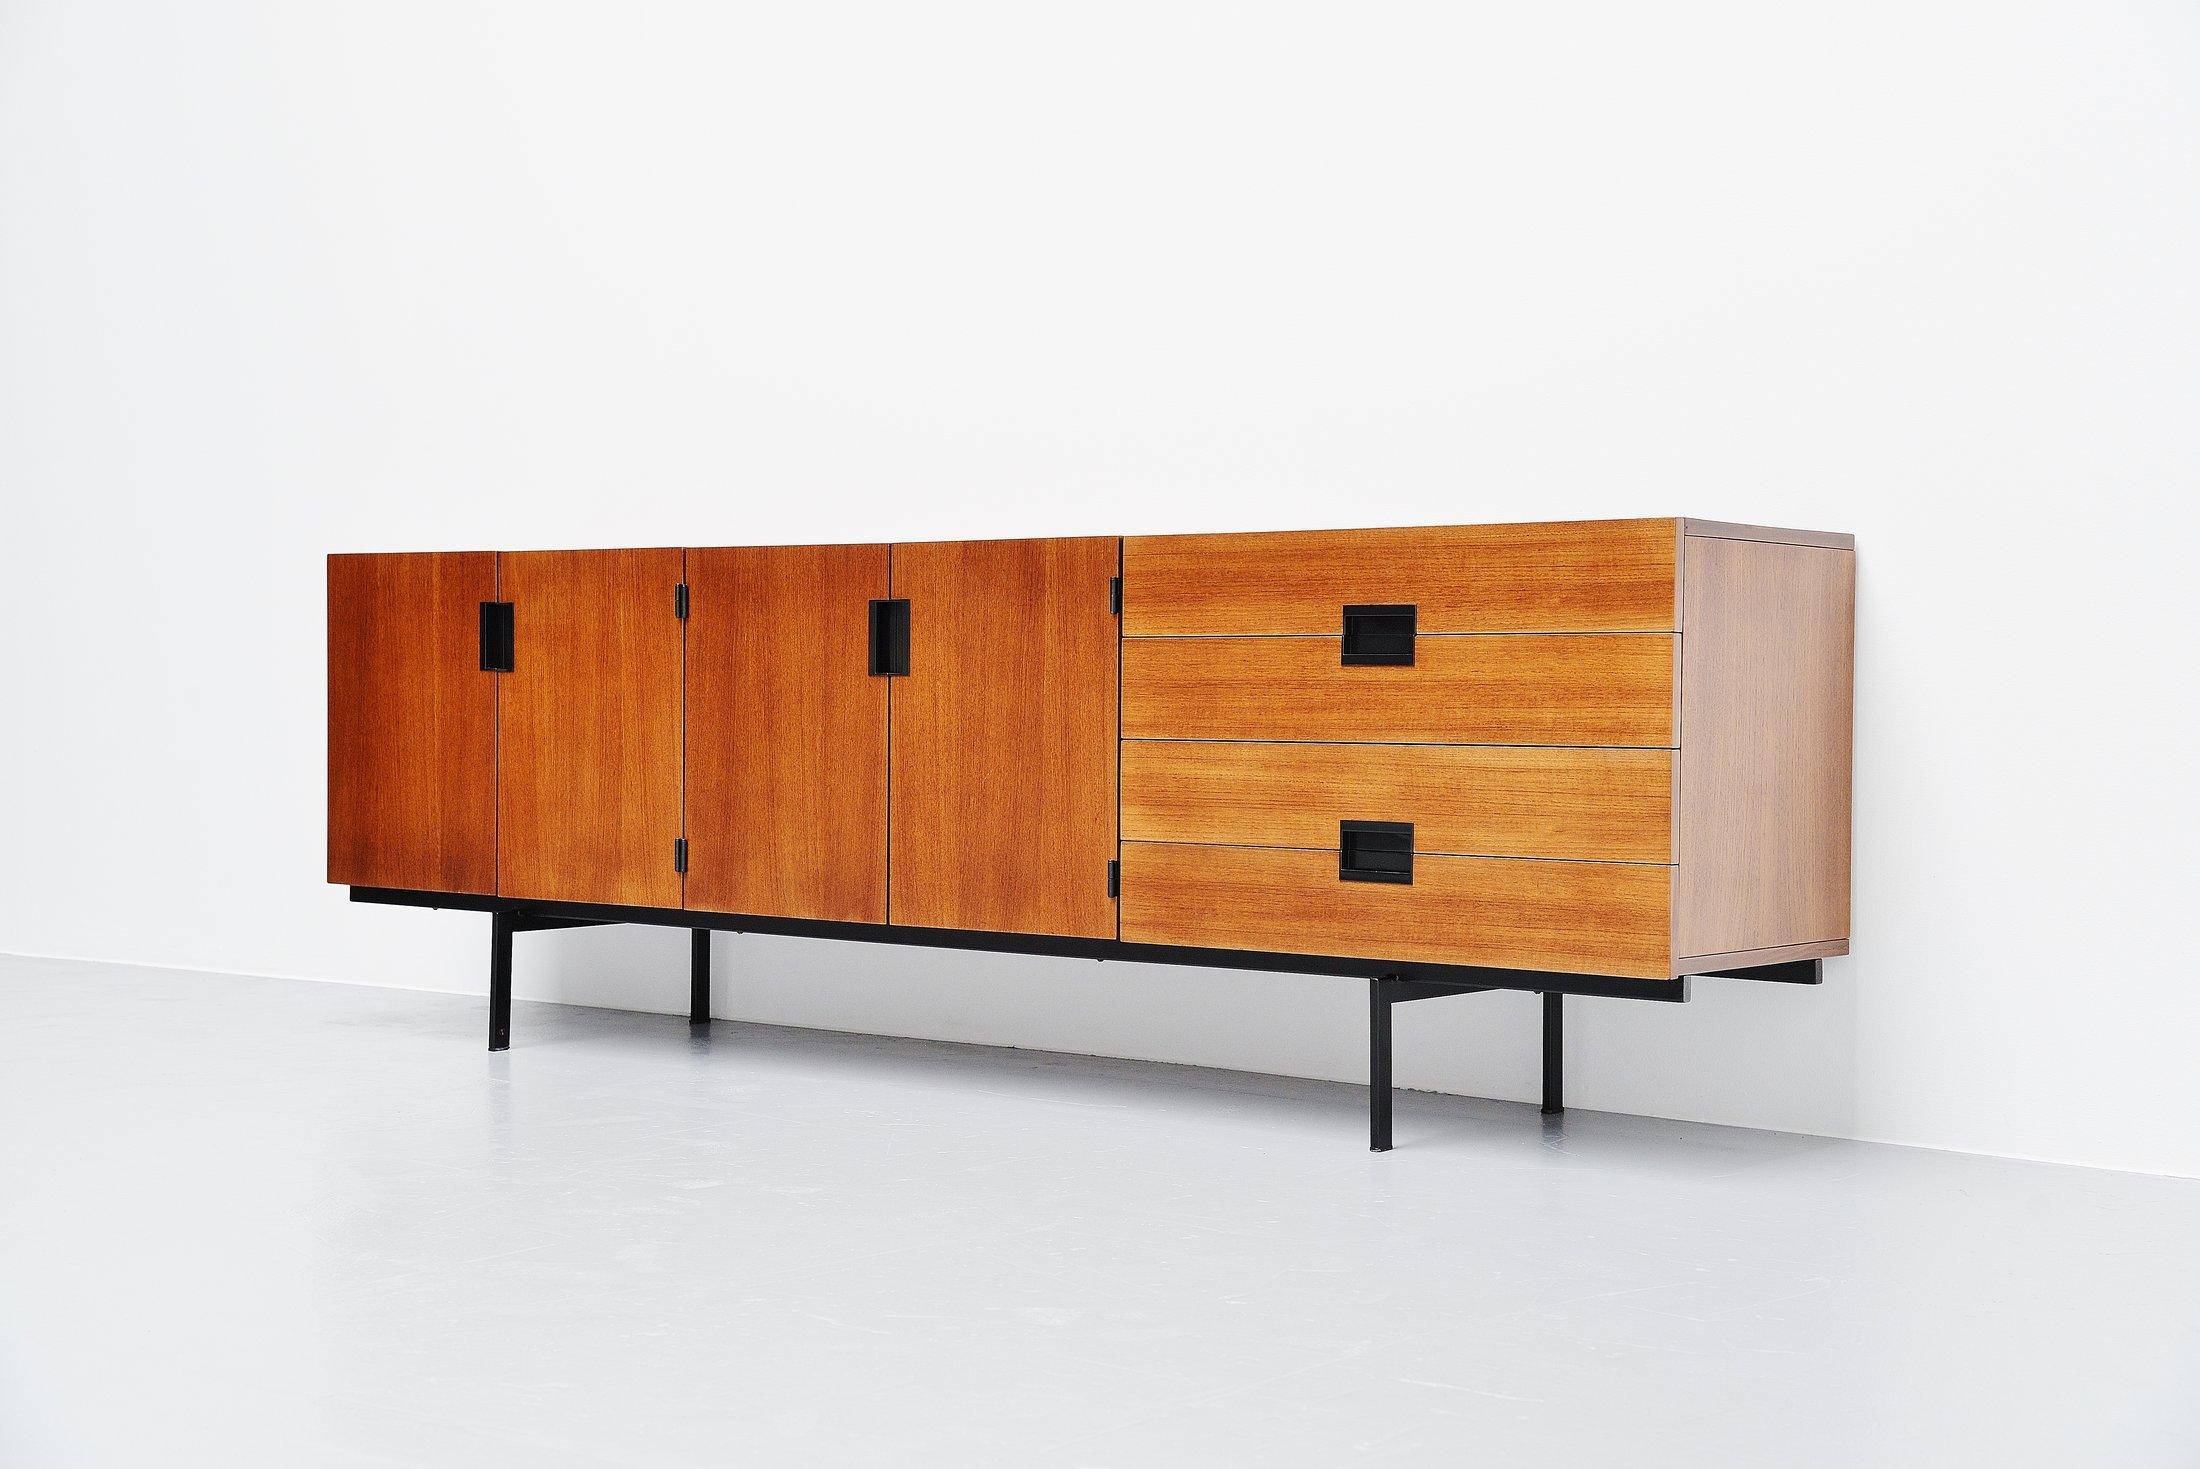 This is for a sideboard model DU03, designed by Cees Braakman and manufactured by Pastoe UMS, Holland, 1958. This sideboard is made of teak wood and has a black lacquered metal frame. The handles are made of black plastic. This sideboard is from the